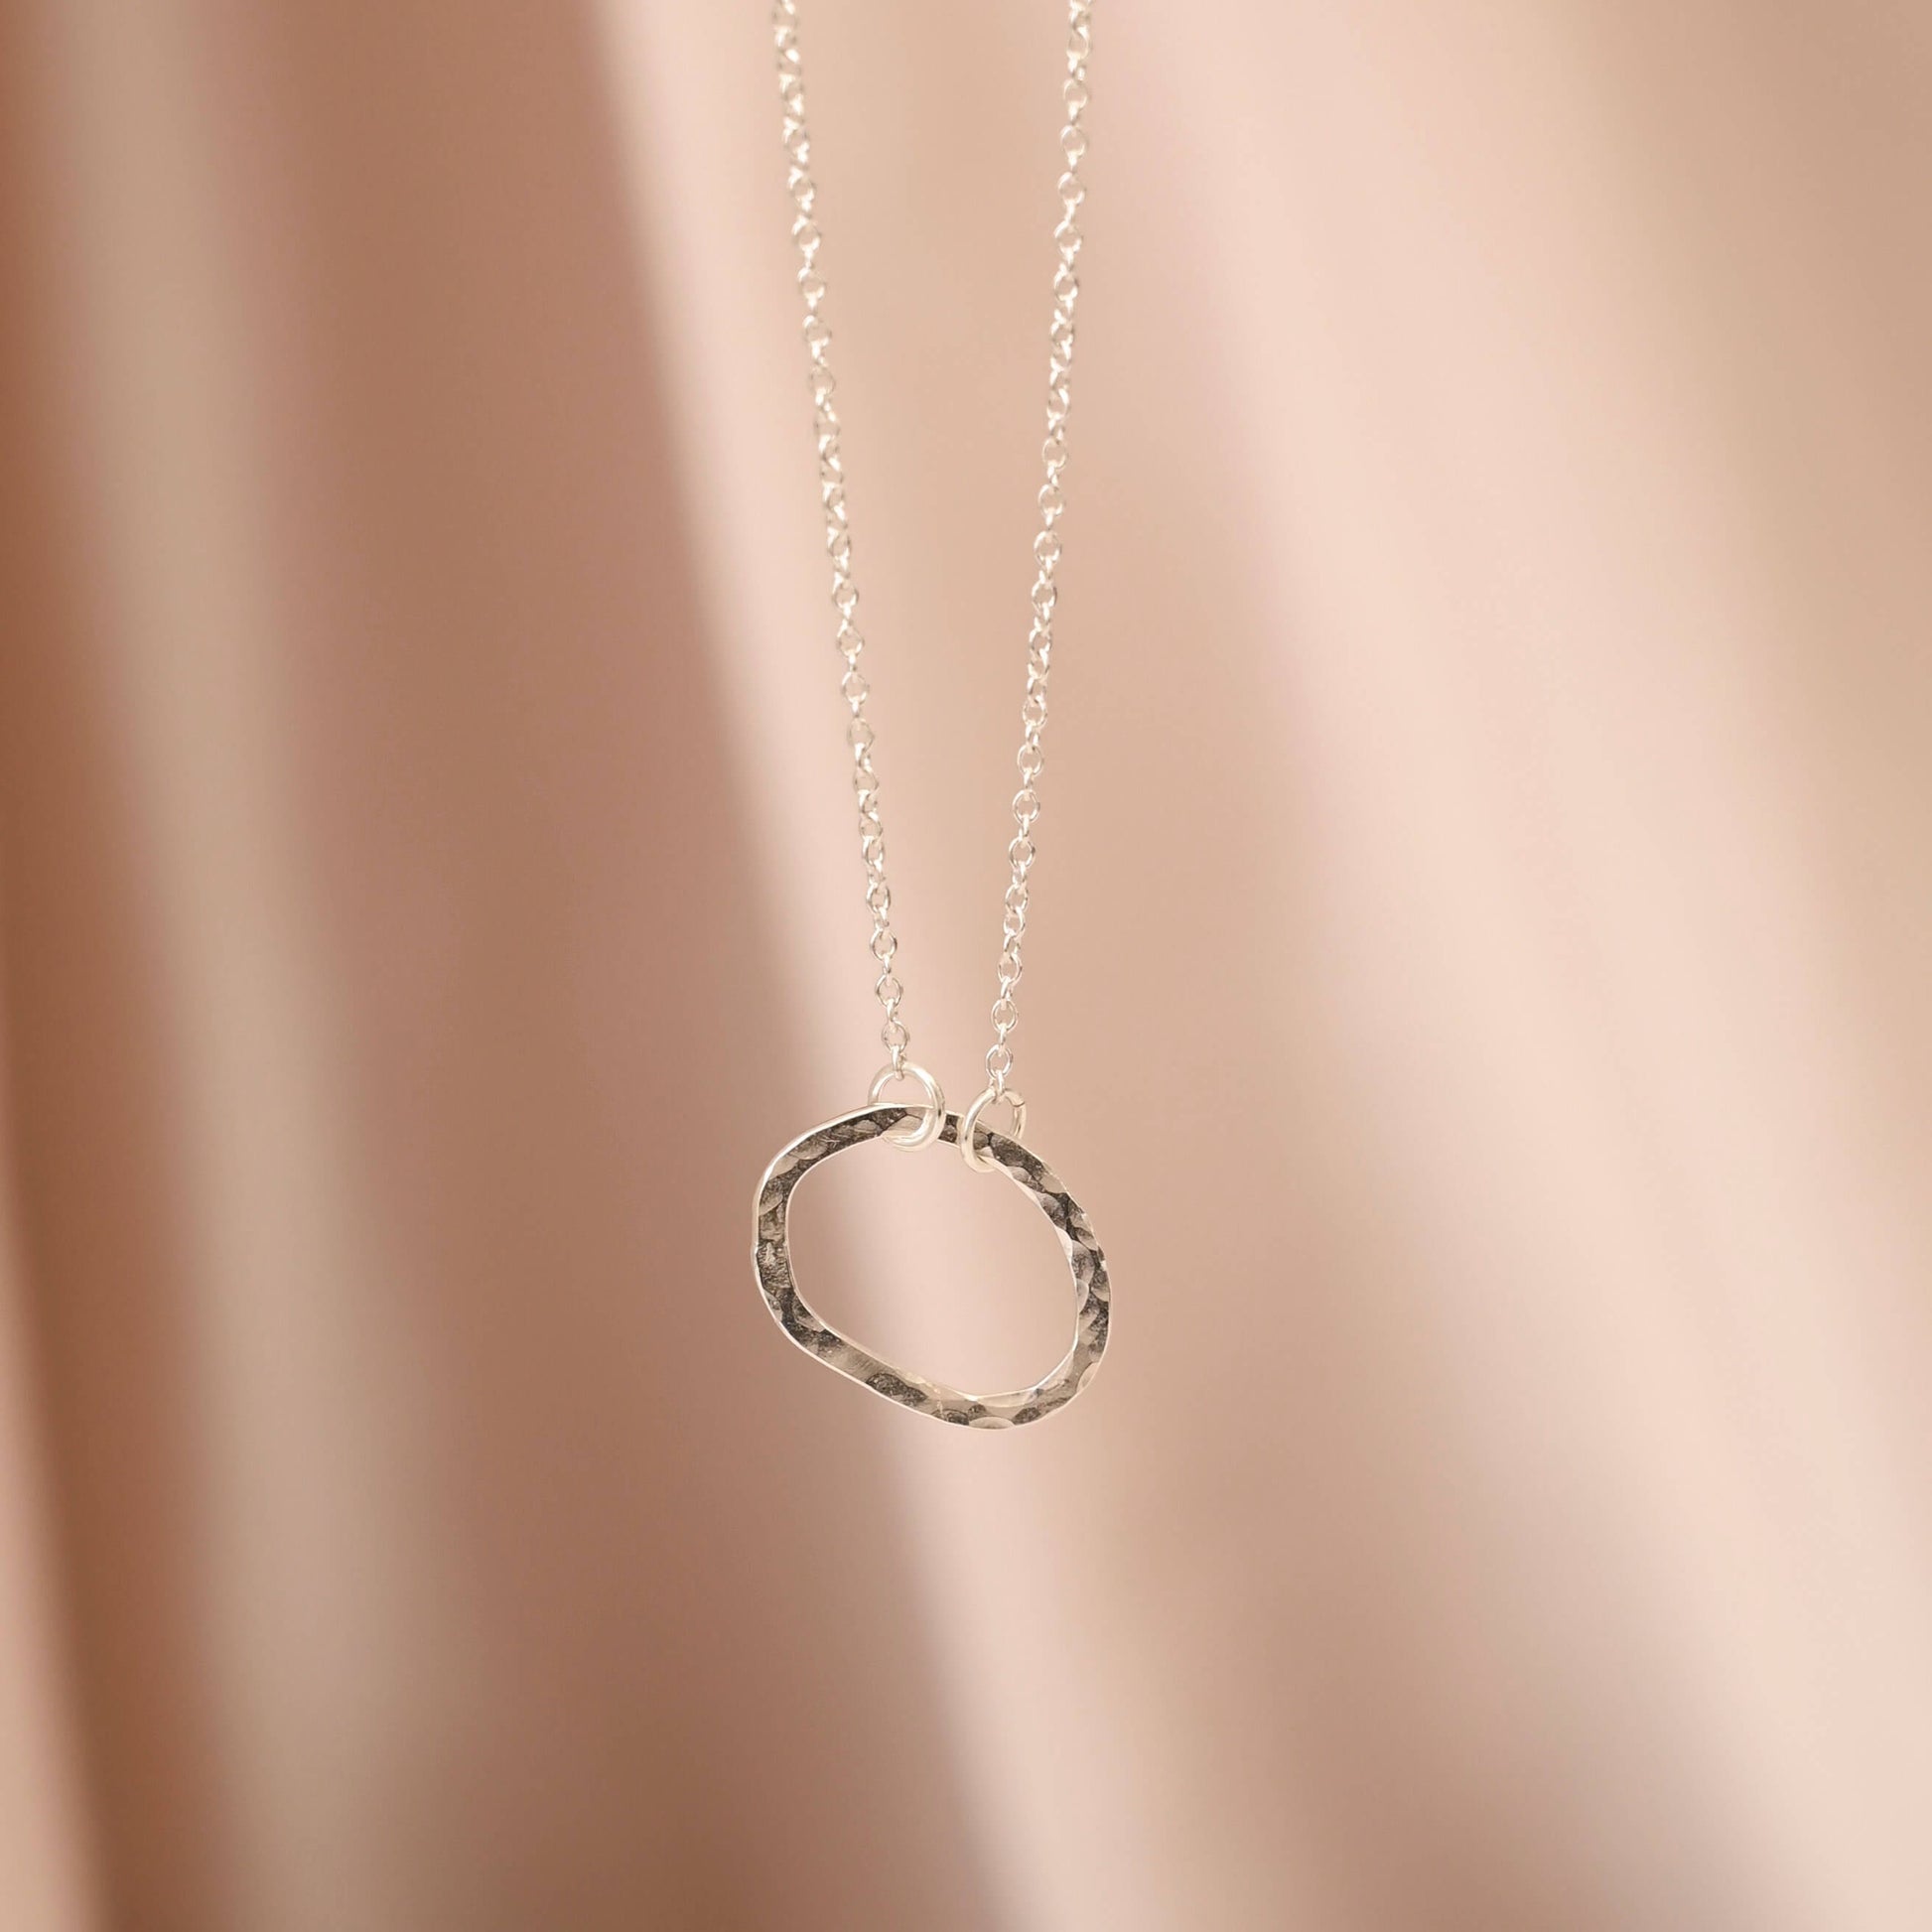 Silver Oval Pendant Necklace - Drumgreenagh Gift Shop